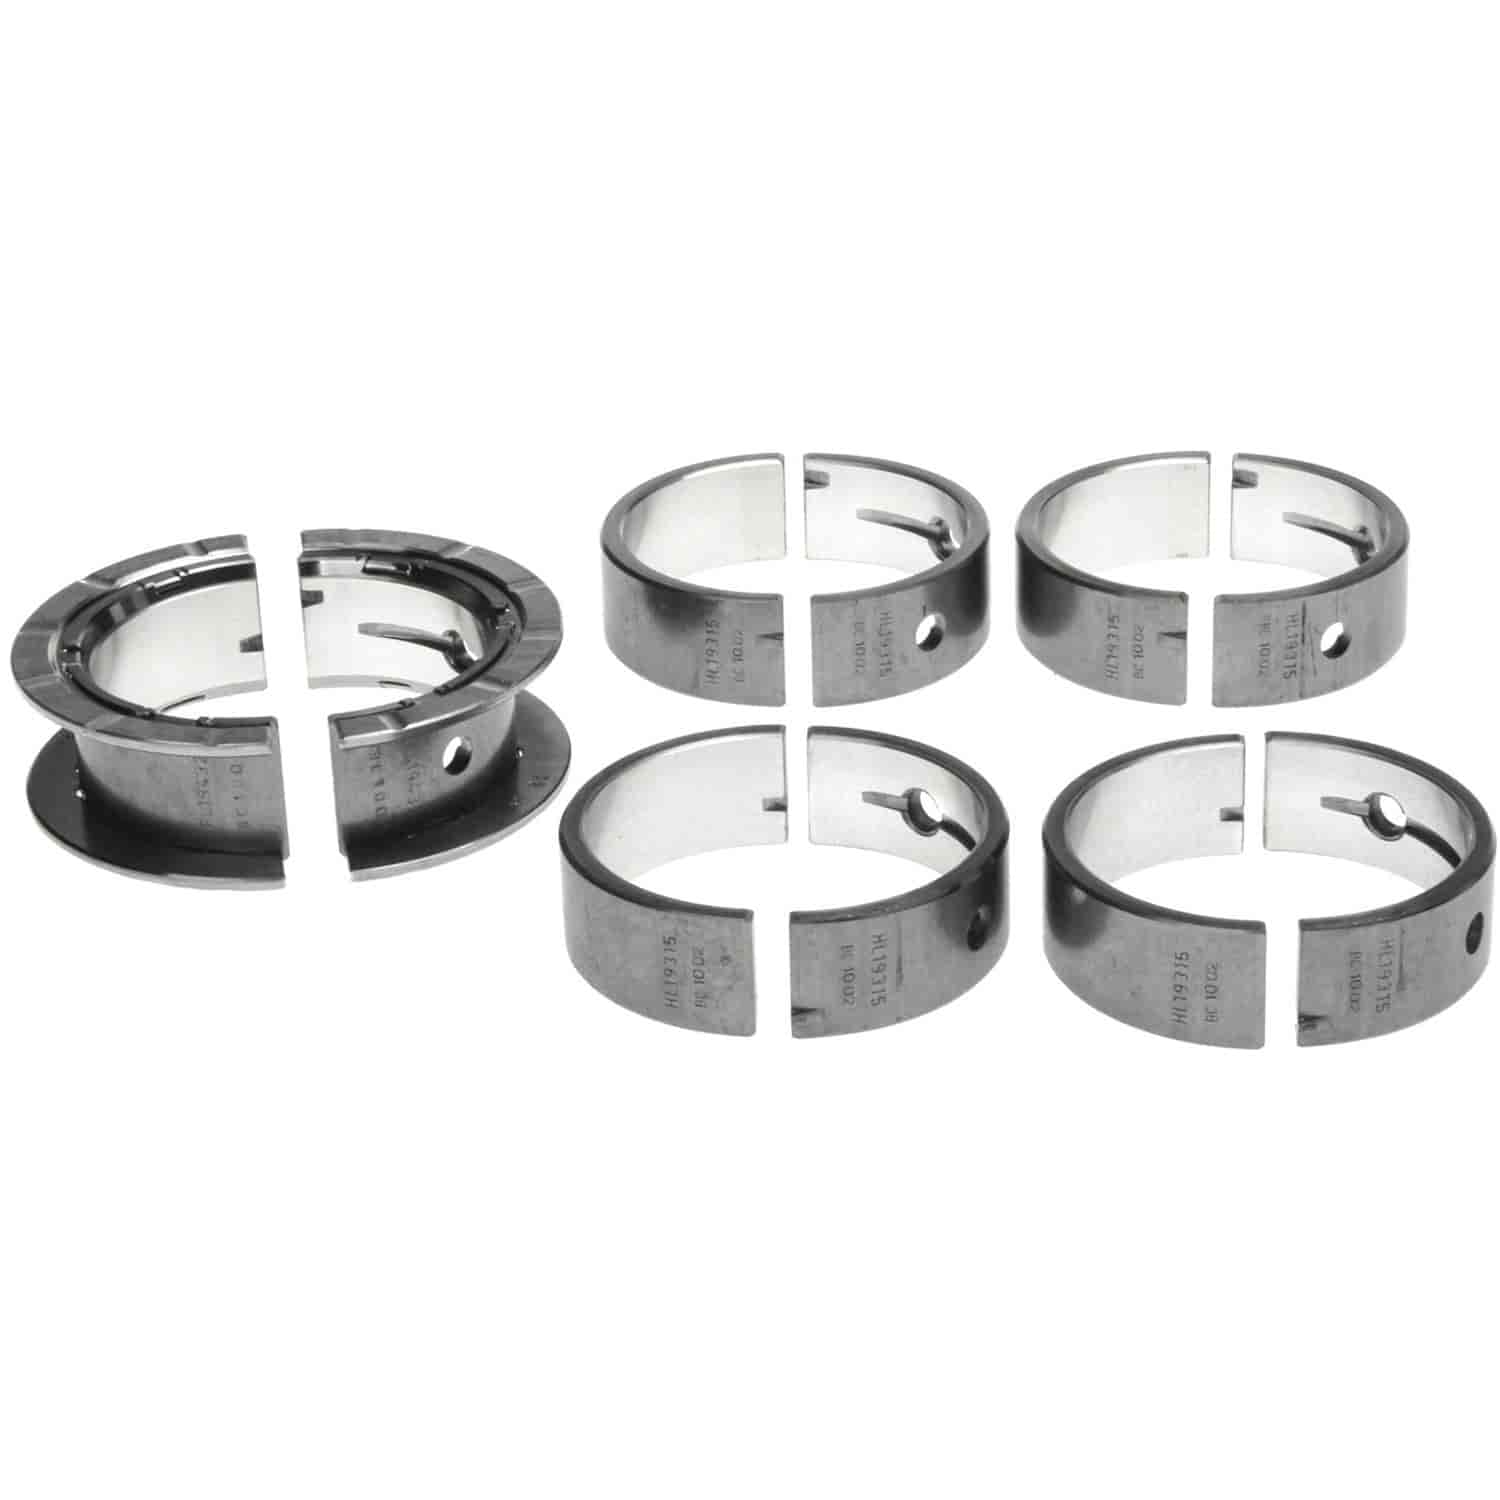 Main Bearing Set Chevy 2000-2015 L4 Ecotec 2.0/2.2/2.4L with Standard Size